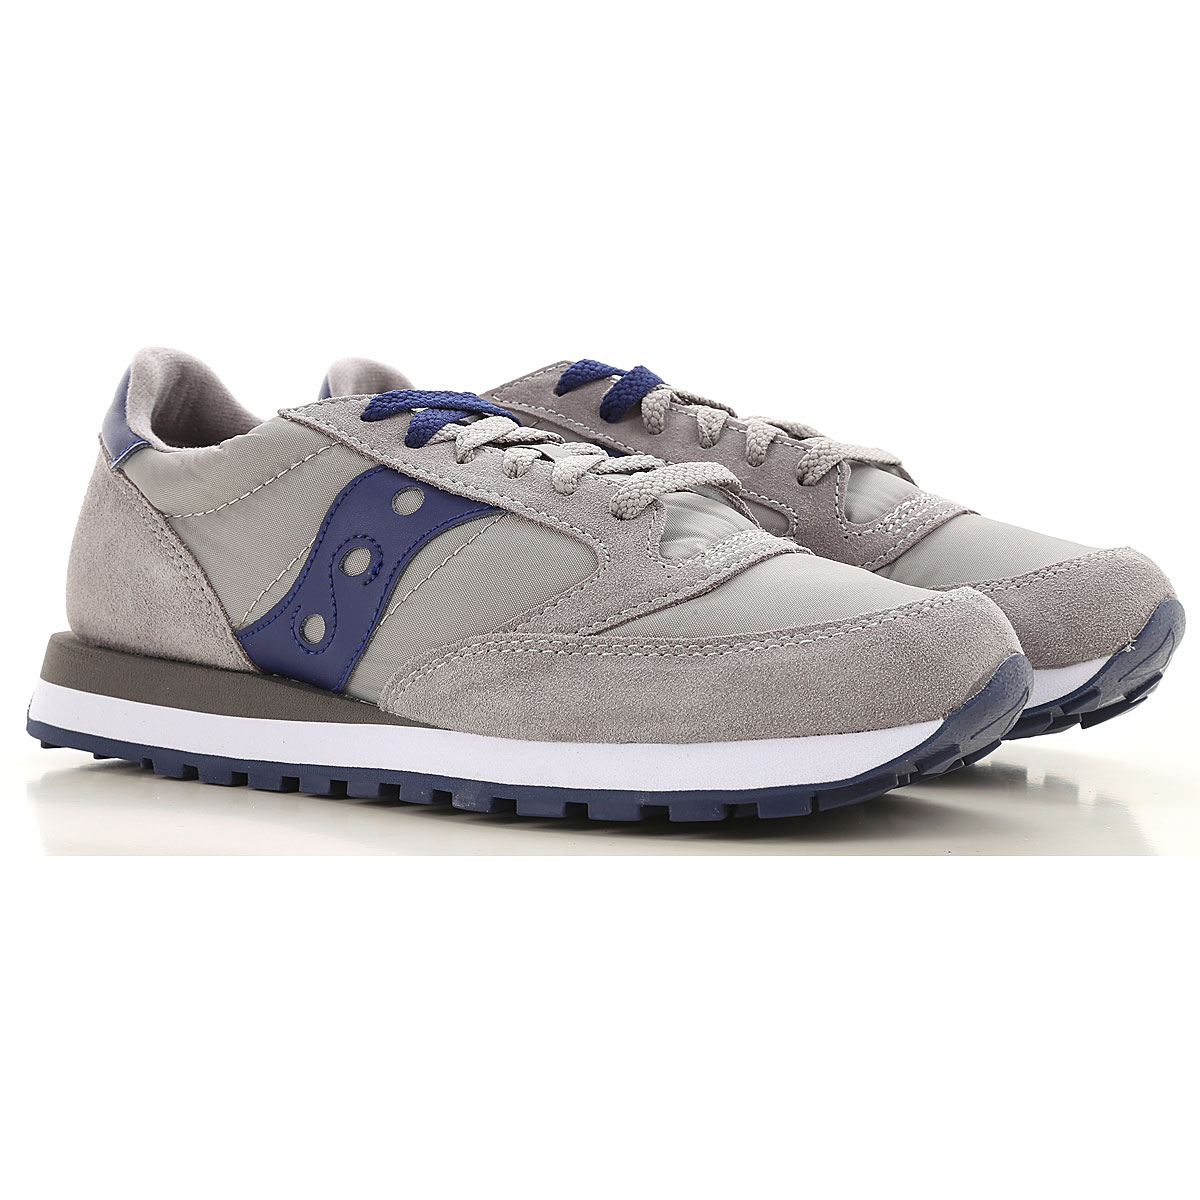 Mens Shoes Saucony, Style code: s2044-307-